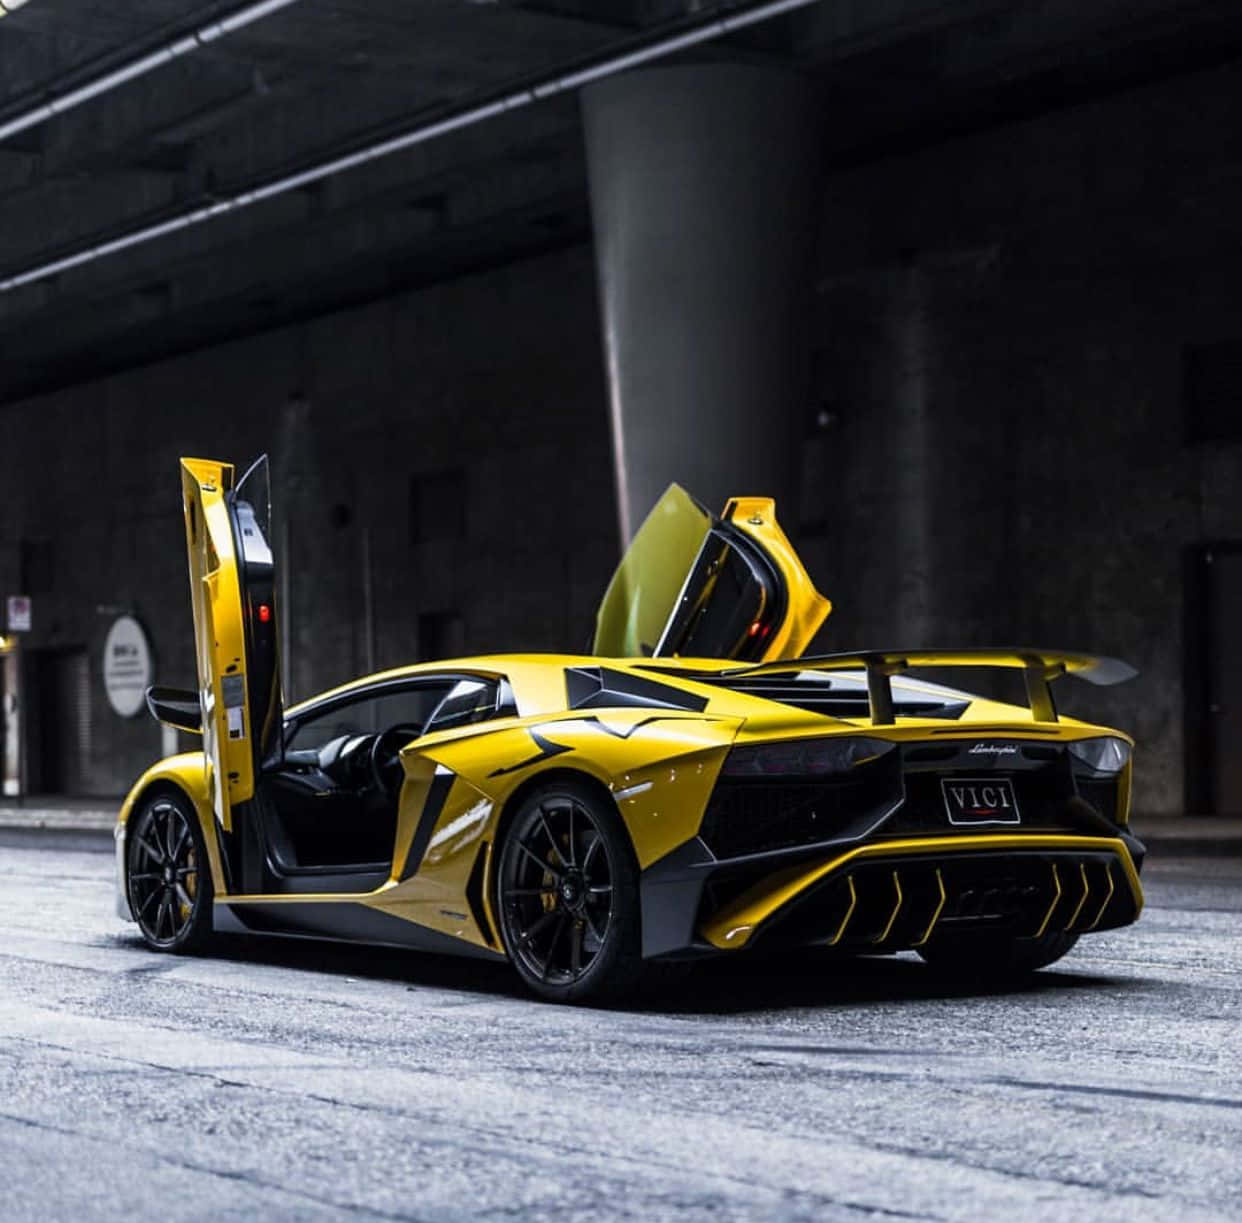 A Yellow Sports Car Is Parked In An Underground Parking Lot